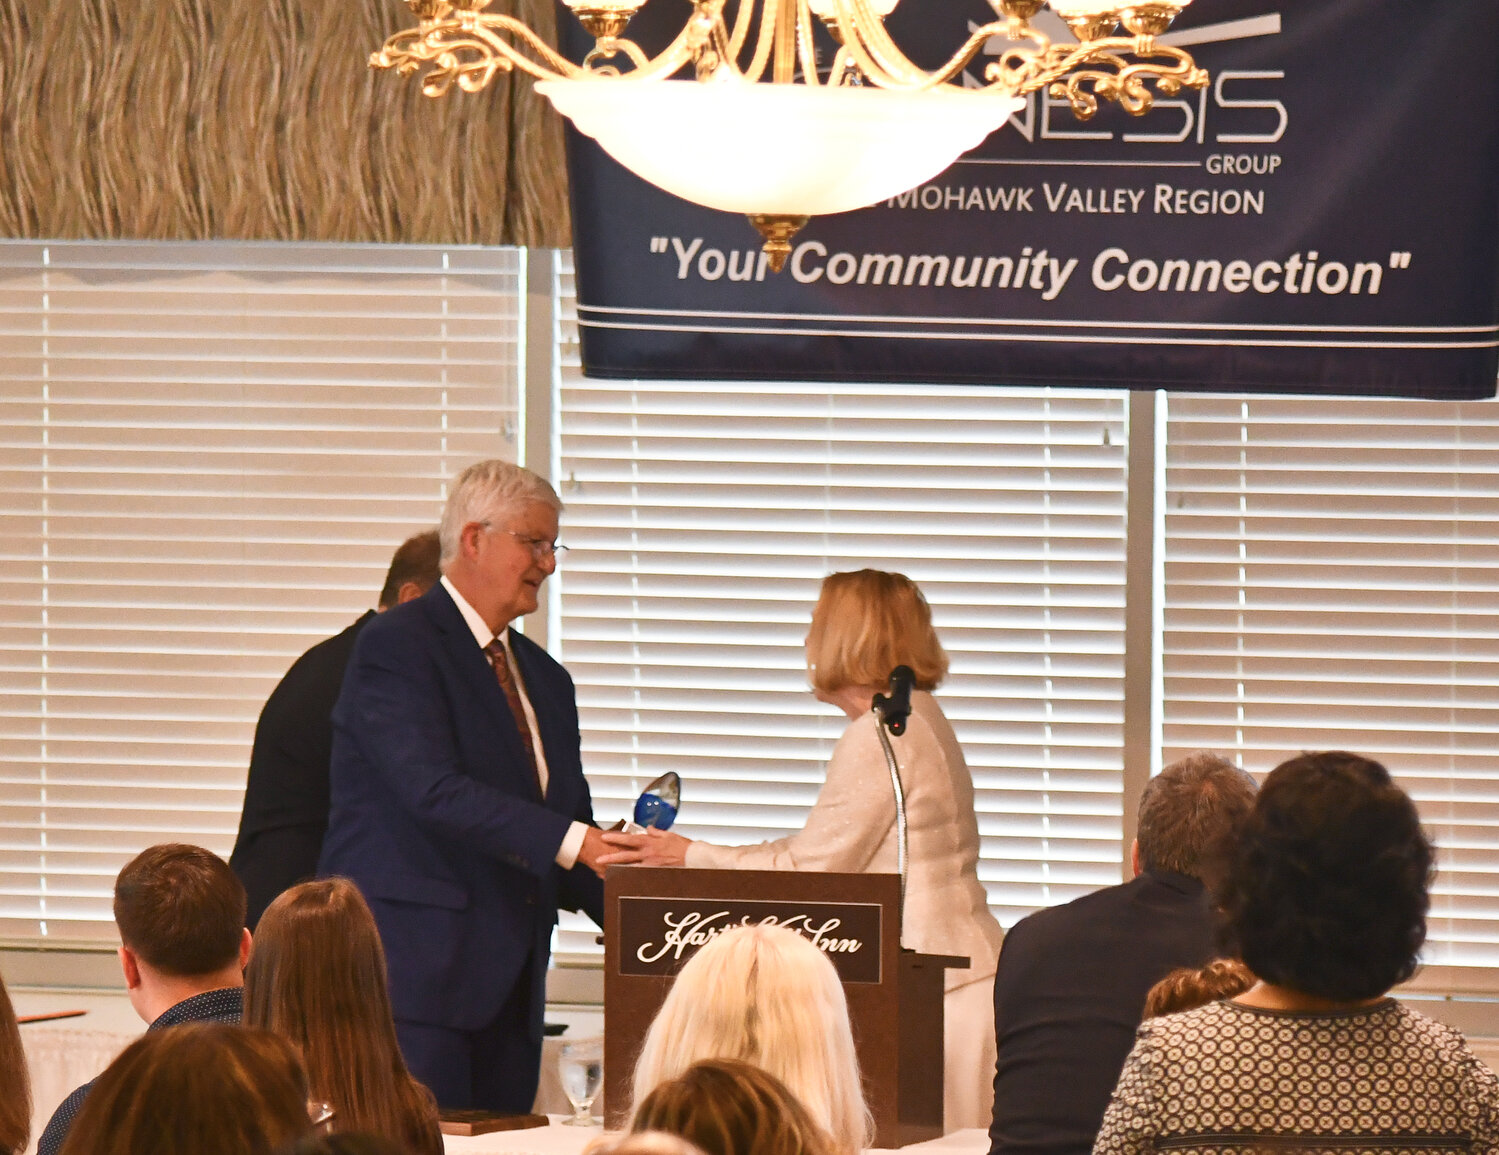 Robert C. Scholefield, MS, RN and executive vice president of facilities and real estate for MVHS, accepts the Genesis Group’s 2023 Lifetime Achievement Award from Darlene Stromstad, MVHS President and CEO, on May 24 at the Hart’s Hill Inn.